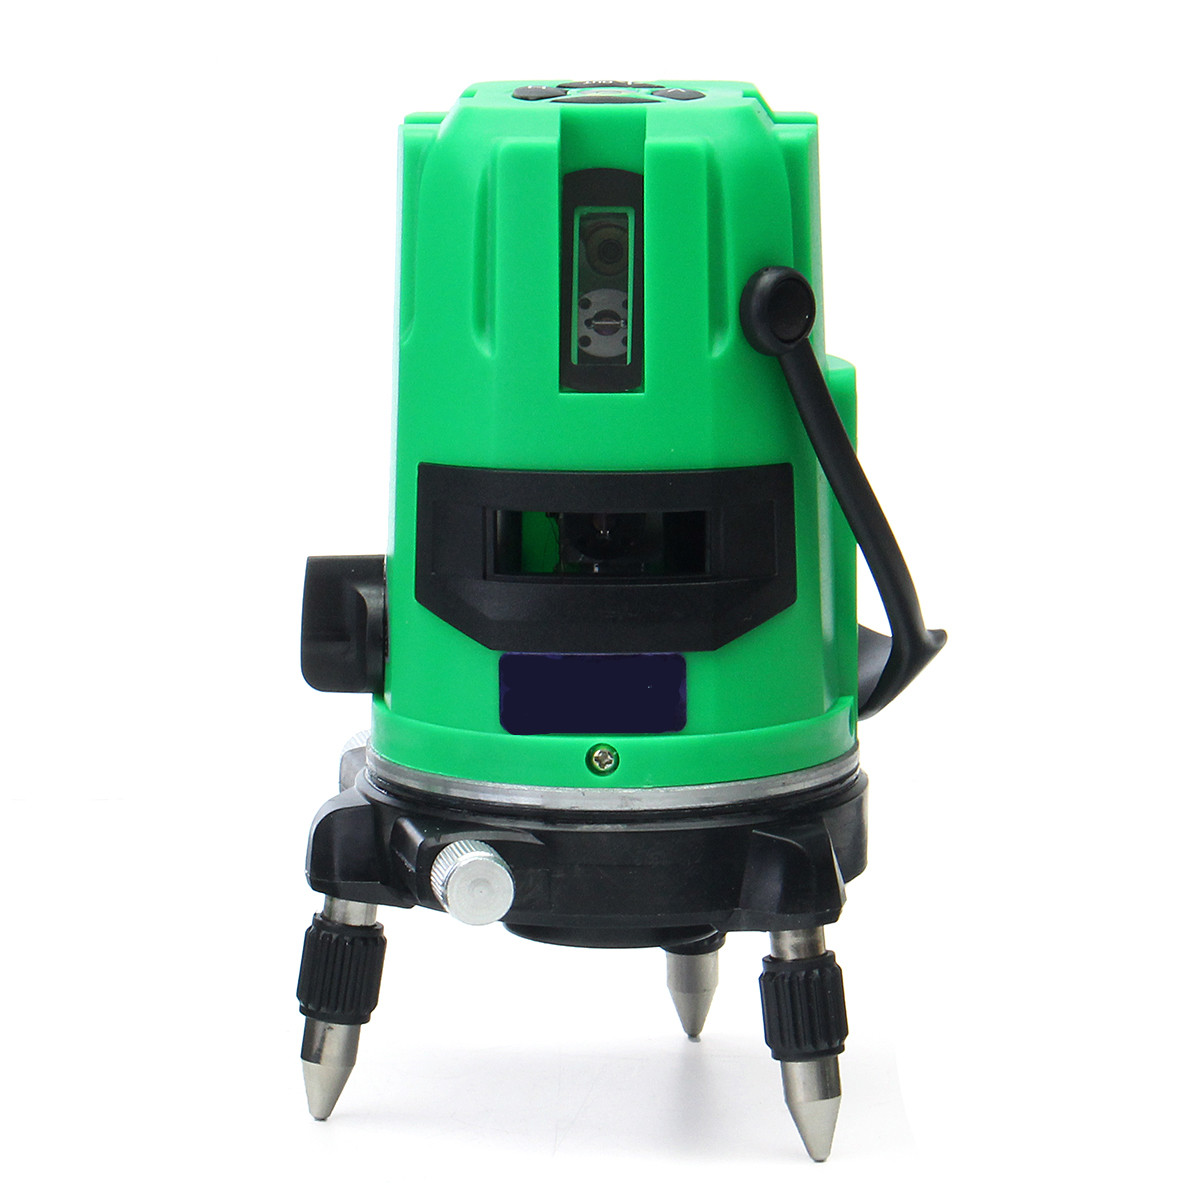 Green-3-Line-4-Points-Laser-Level-360-Rotary-Laser-Line-Self-Leveling-with-Tripod-1166737-7